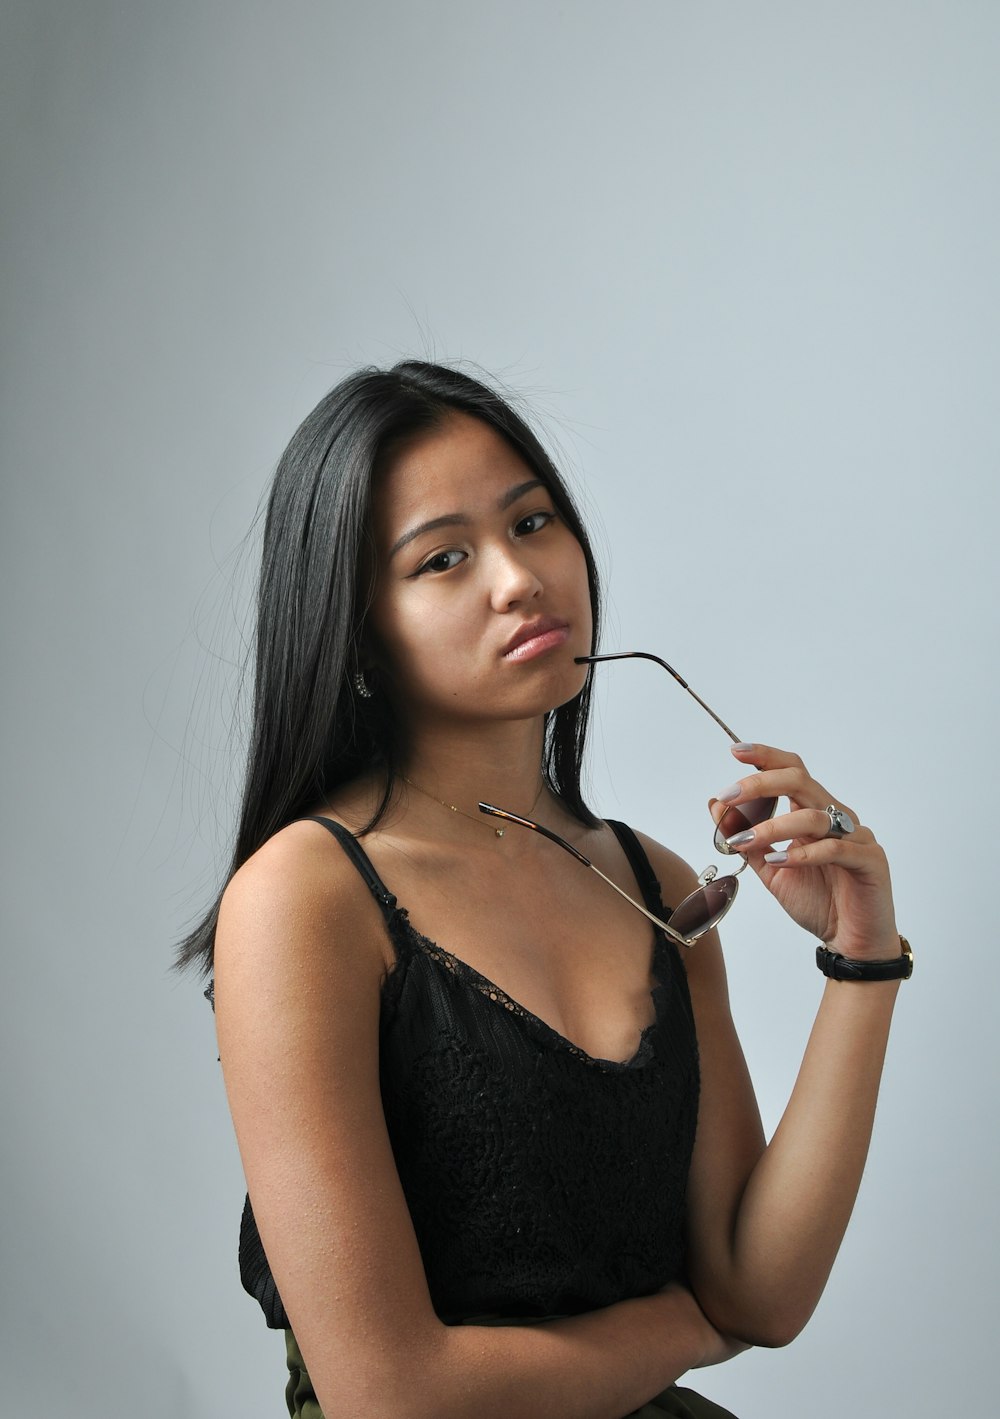 a woman in a black top holding a pair of scissors